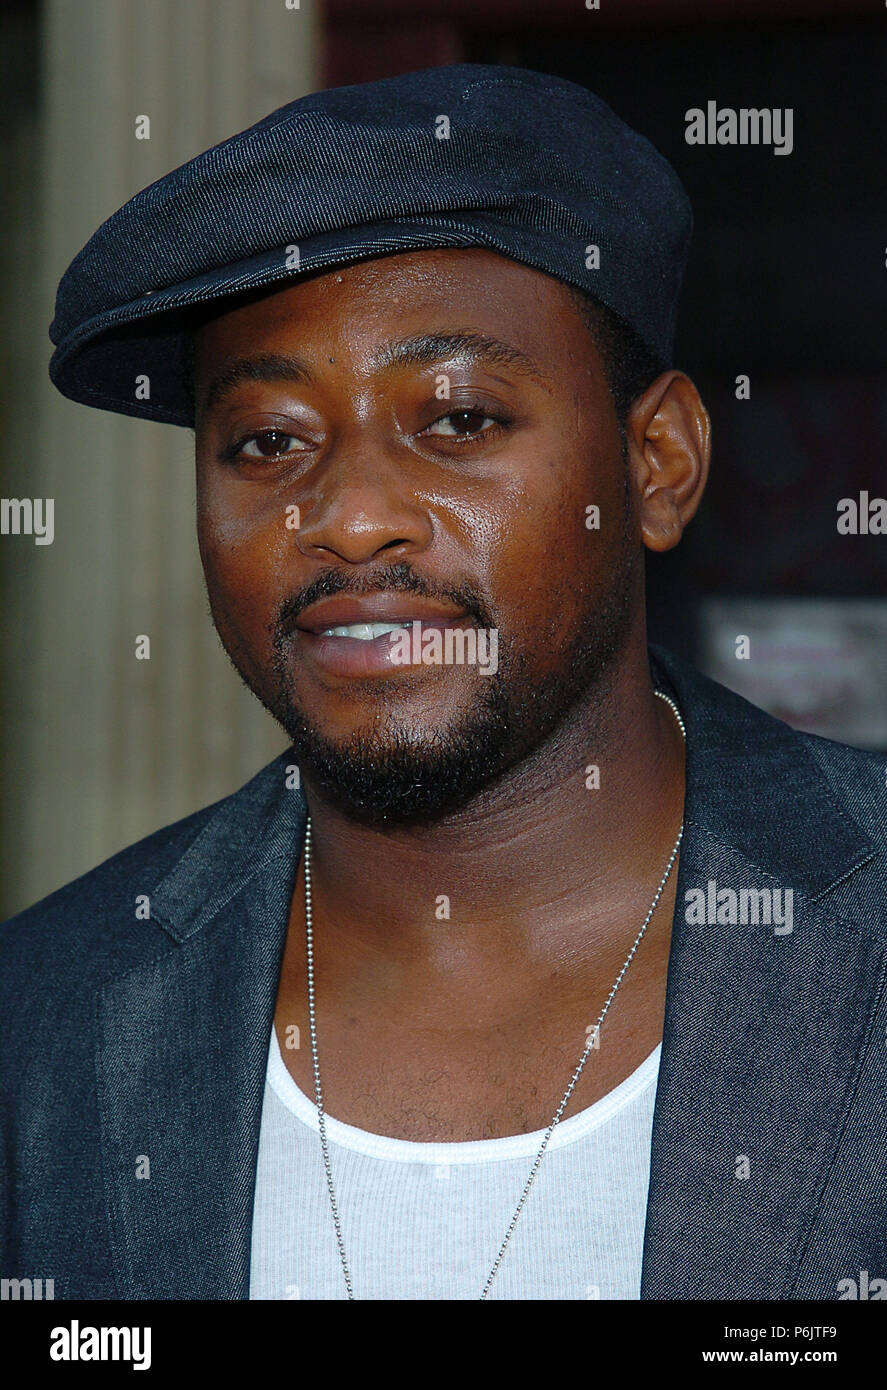 Omar Epps (House) arriving at the 2004 Summer tca Fox All-Star Party on the Fox Lot in Los Angeles. July 16, 2004. EppsOmar House081 Red Carpet Event, Vertical, USA, Film Industry, Celebrities,  Photography, Bestof, Arts Culture and Entertainment, Topix Celebrities fashion /  Vertical, Best of, Event in Hollywood Life - California,  Red Carpet and backstage, USA, Film Industry, Celebrities,  movie celebrities, TV celebrities, Music celebrities, Photography, Bestof, Arts Culture and Entertainment,  Topix, headshot, vertical, one person,, from the year , 2004, inquiry tsuni@Gamma-USA.com Stock Photo